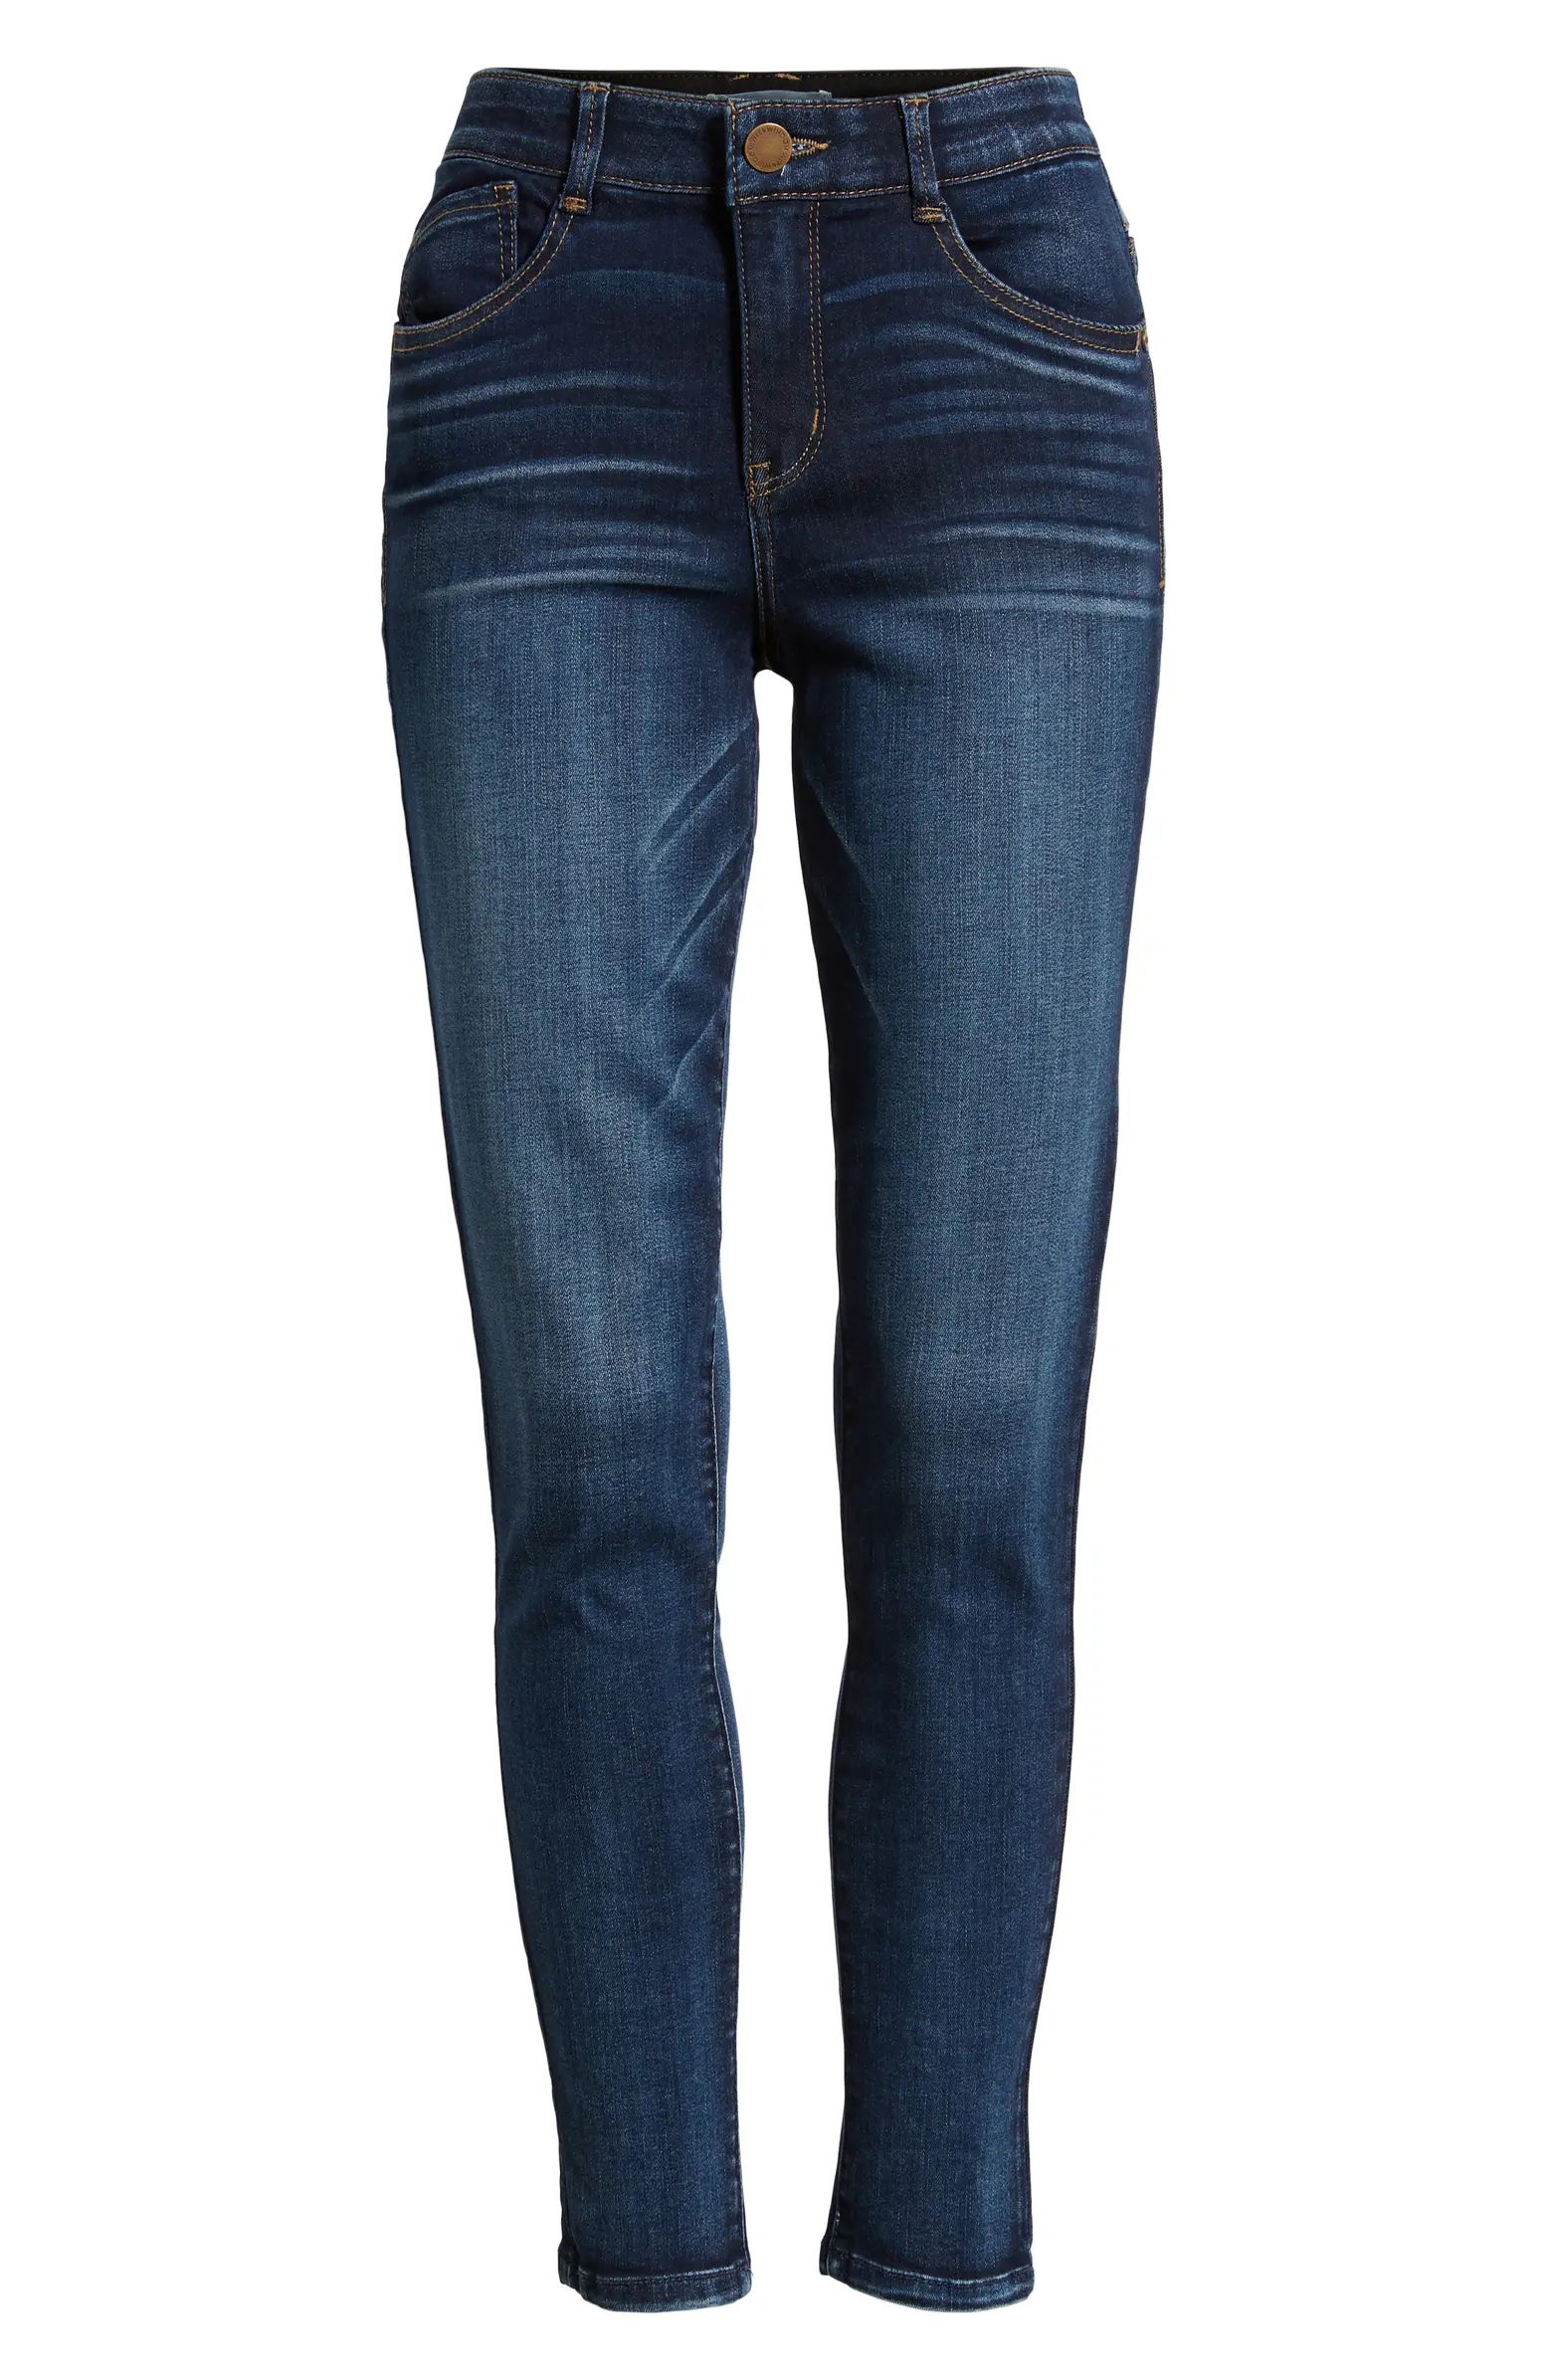 Wit & Wisdom Luxe Touch High Waist Skinny Ankle Jeans | Nordstrom | Nordstrom